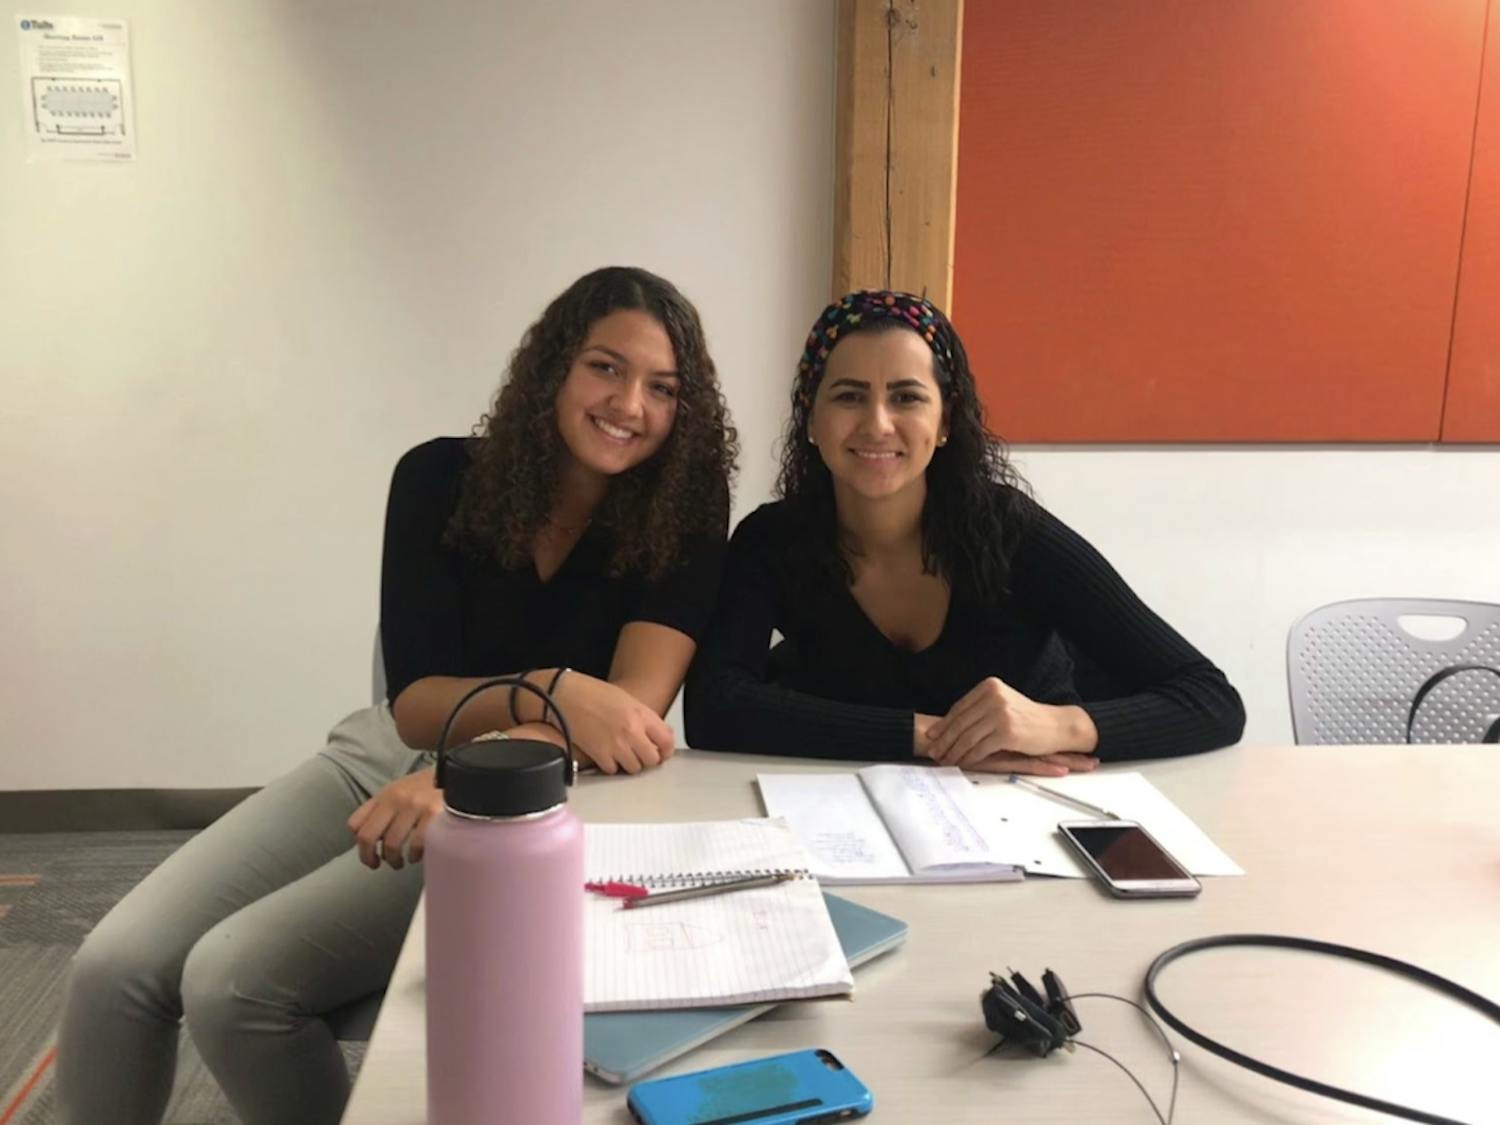 Elise Webster, a Tufts student who graduated in 2022, is seated next to her Portuguese-speaking learner Regiane at Potencia.